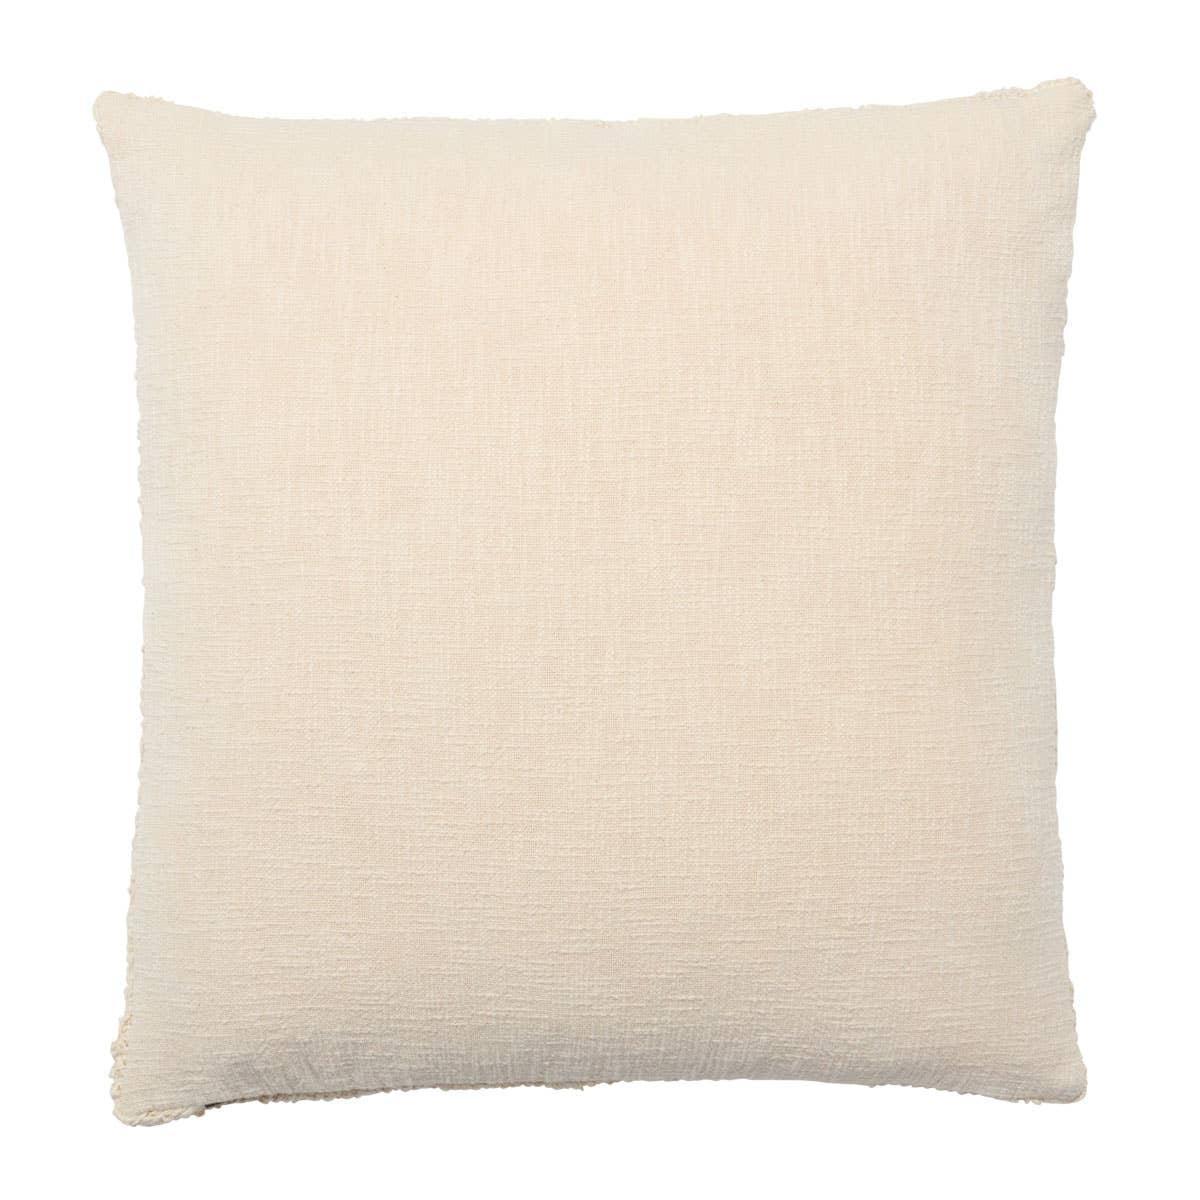 The handwoven Klara pillow Tordis delights with an intricately cross-woven linen design that exudes comfort and homeliness. The immaculate texture provides a rustic draw that thrills in any contemporary home. The Tordis design features a loose weave in a neutral cream hue.Indoor Pillow Amethyst Home provides interior design, new home construction design consulting, vintage area rugs, and lighting in the Houston metro area.